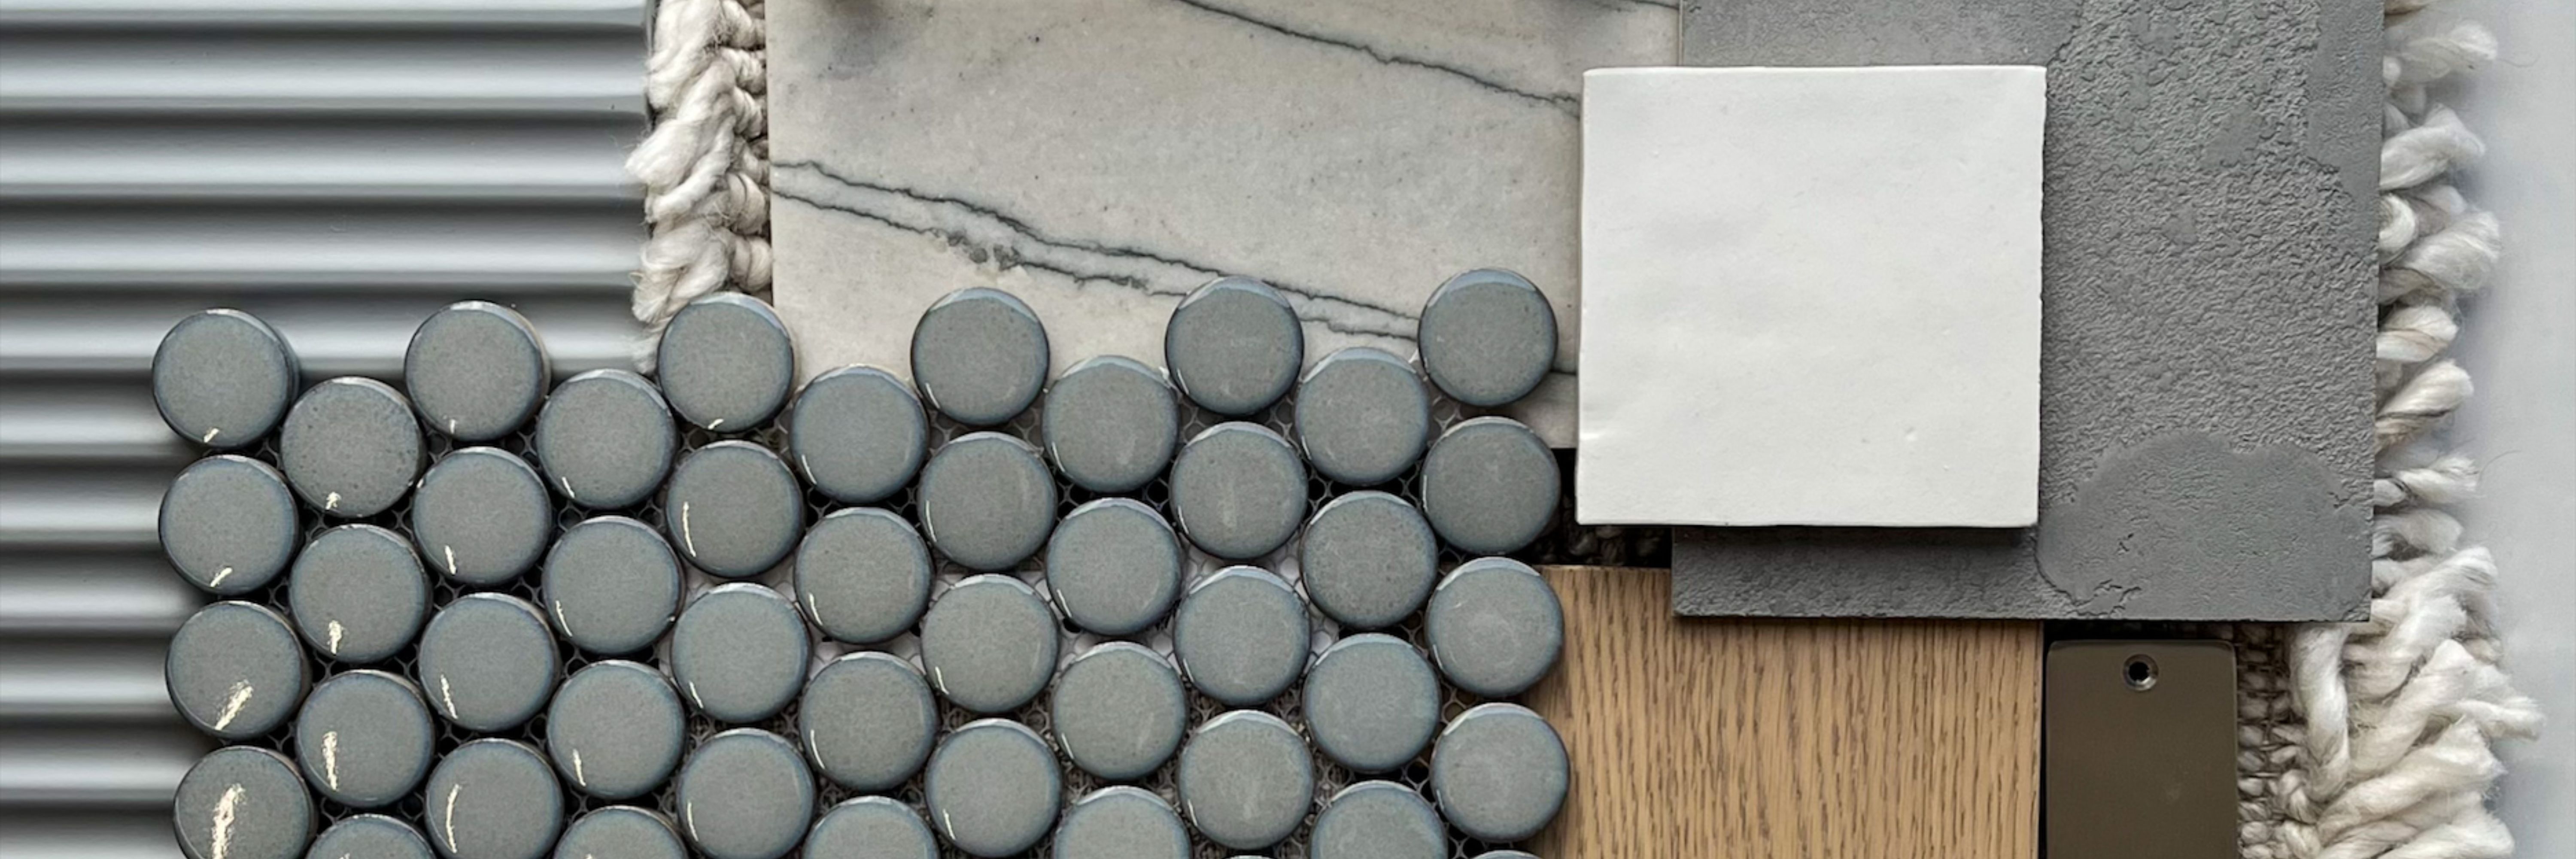 Tile Warehouse mood board buttons